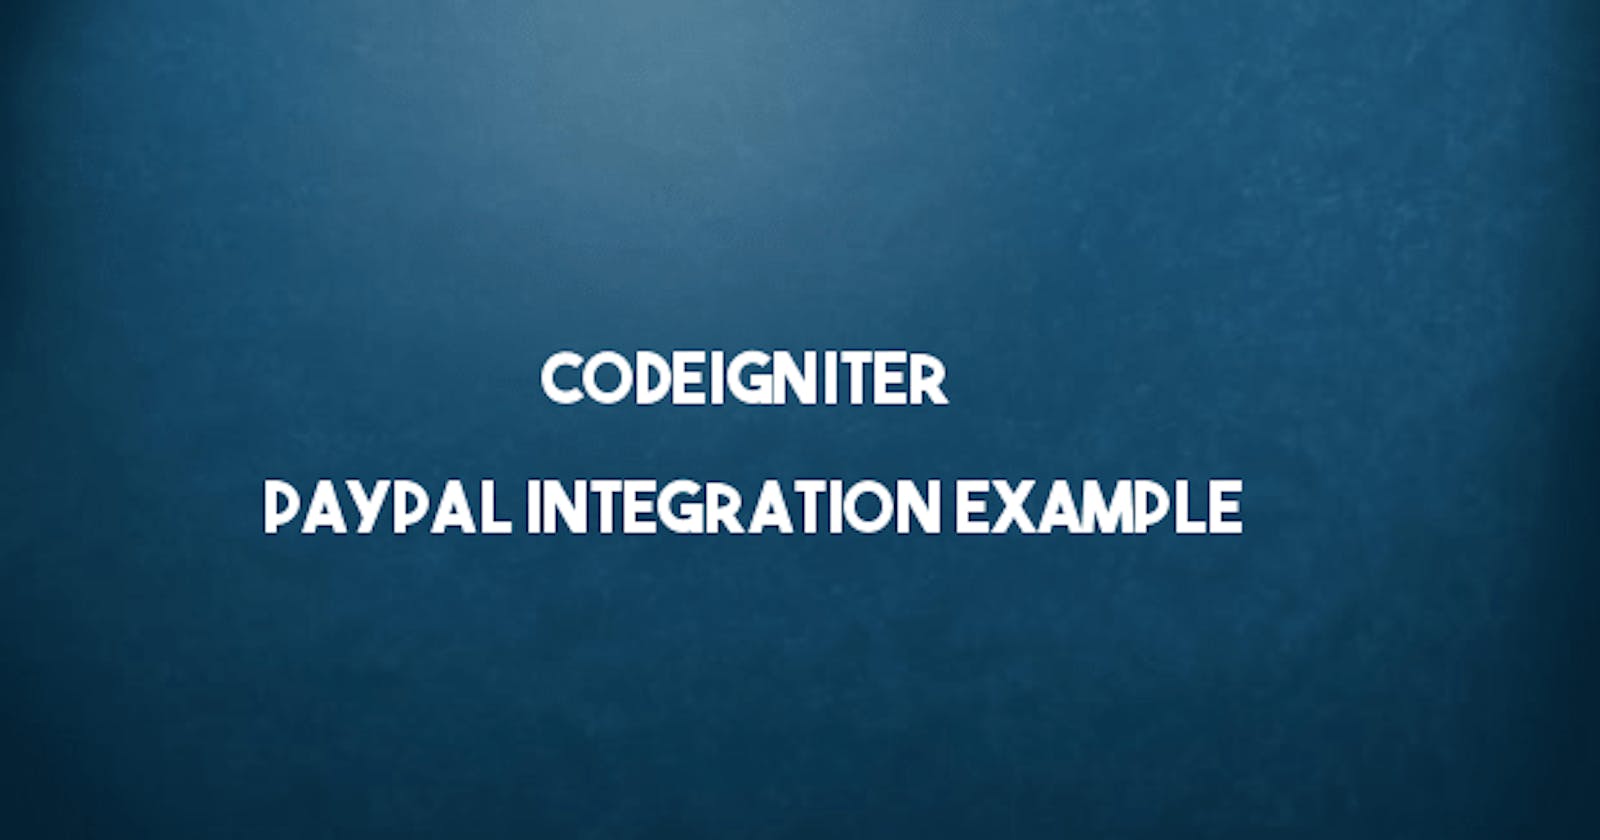 Codeigniter Paypal Integration Example